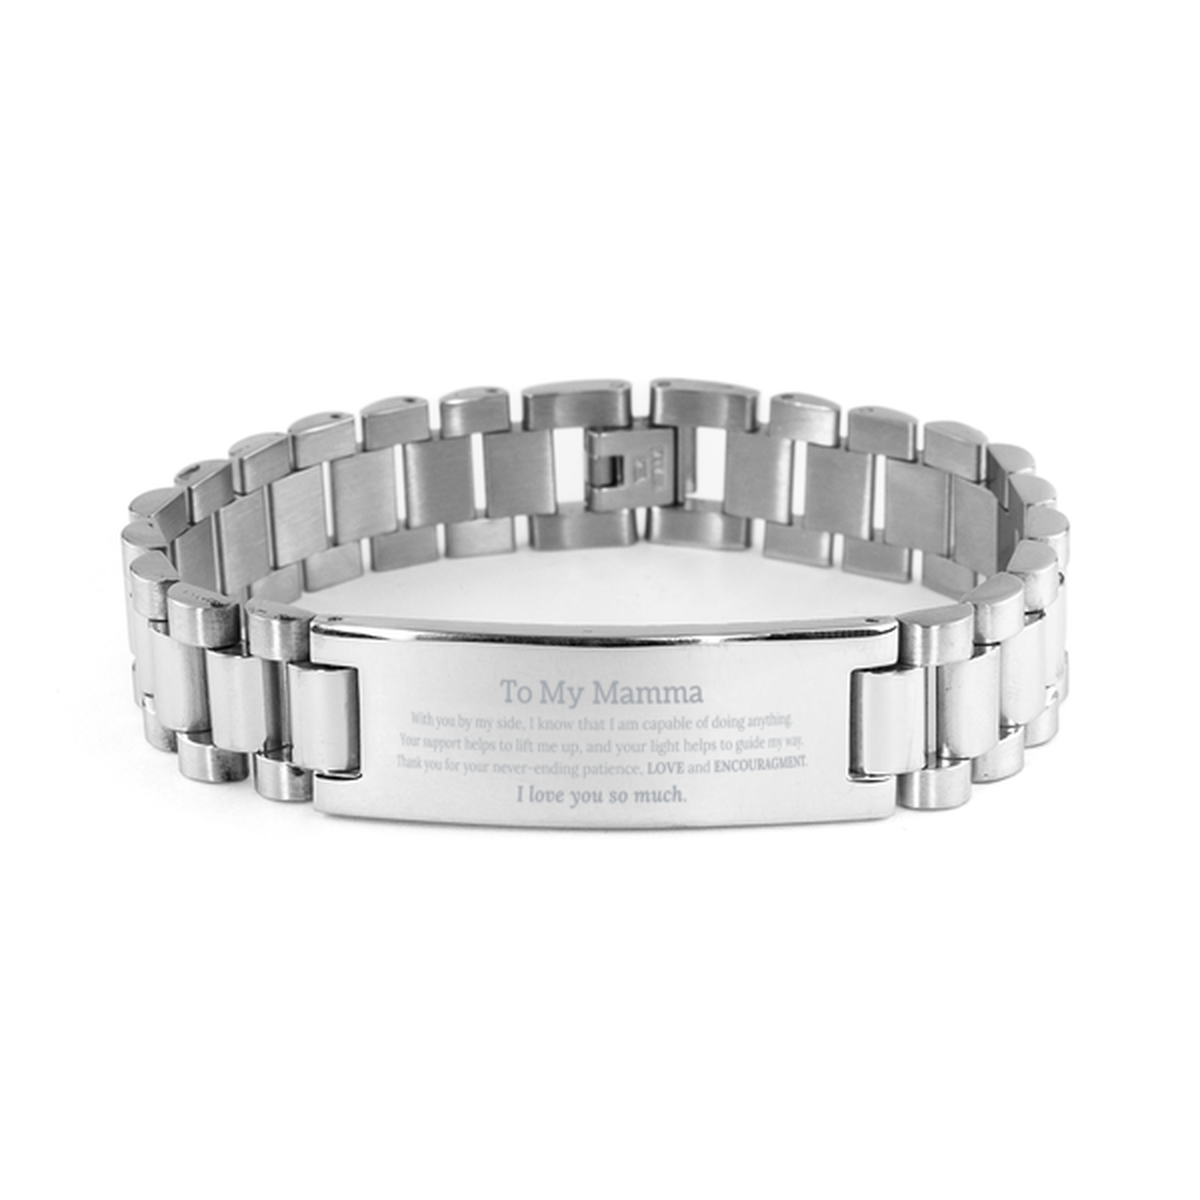 Appreciation Mamma Ladder Stainless Steel Bracelet Gifts, To My Mamma Birthday Christmas Wedding Keepsake Gifts for Mamma With you by my side, I know that I am capable of doing anything. I love you so much